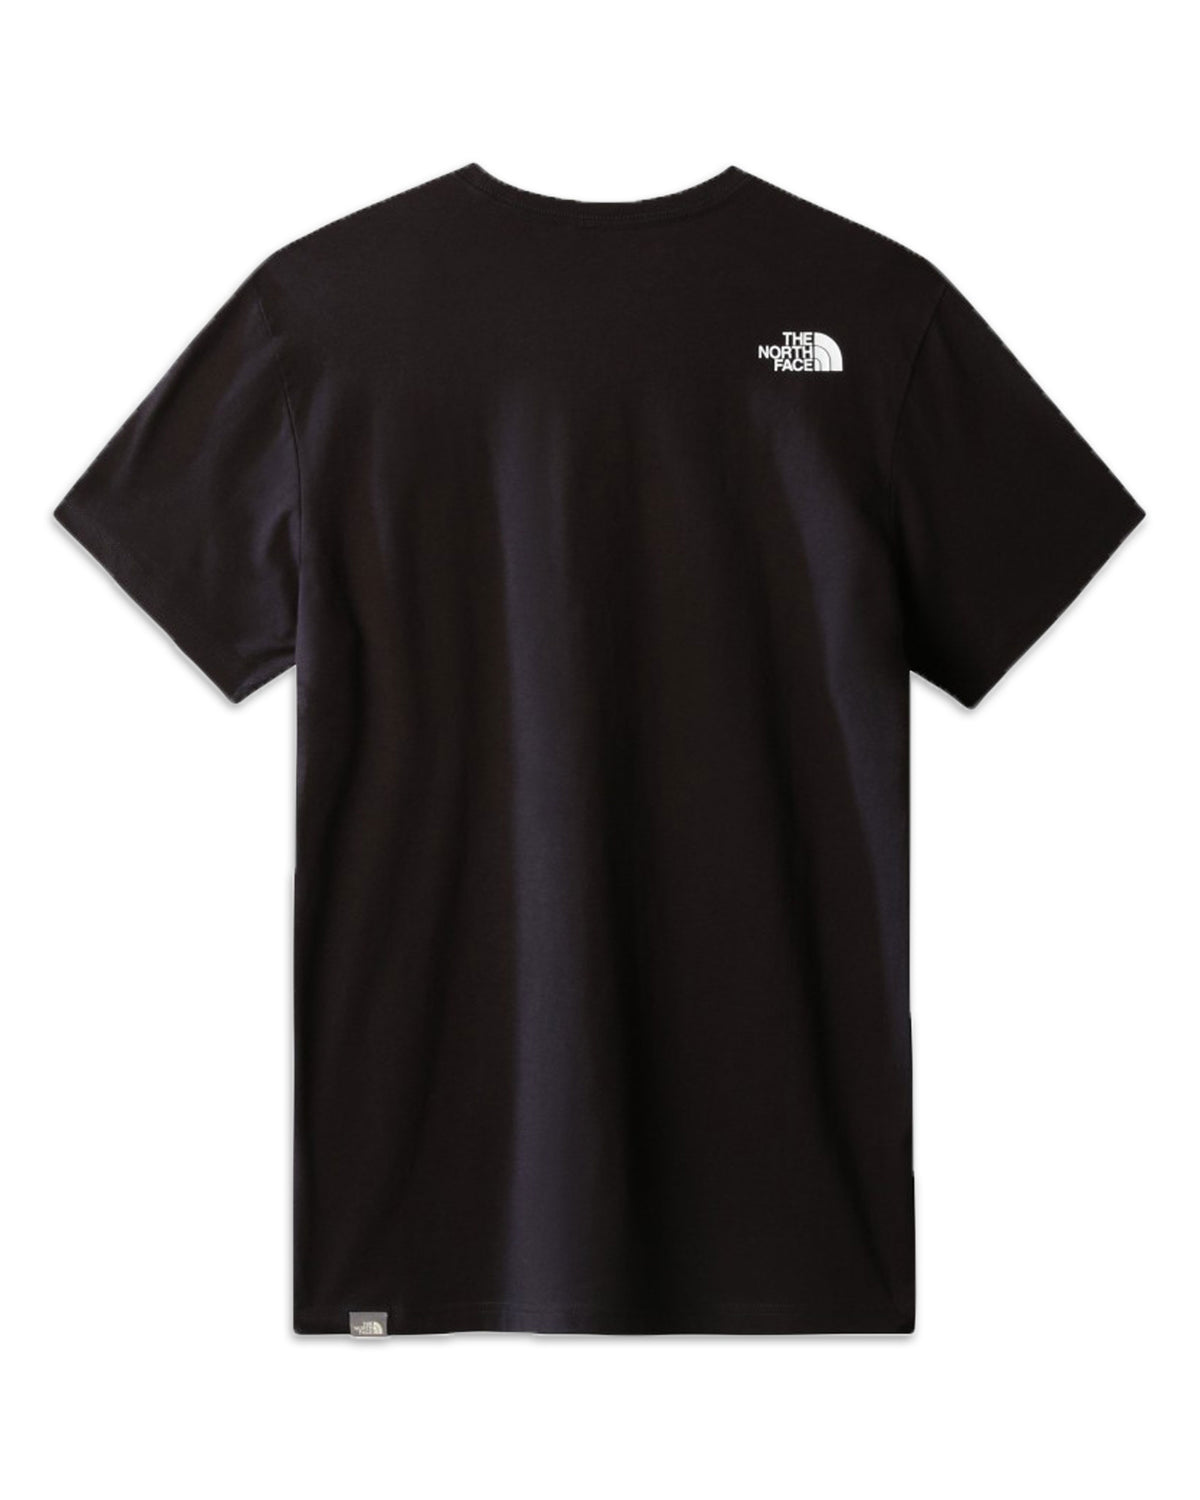 T-Shirt Uomo The North Face Never Stop Exploring Tee Nero